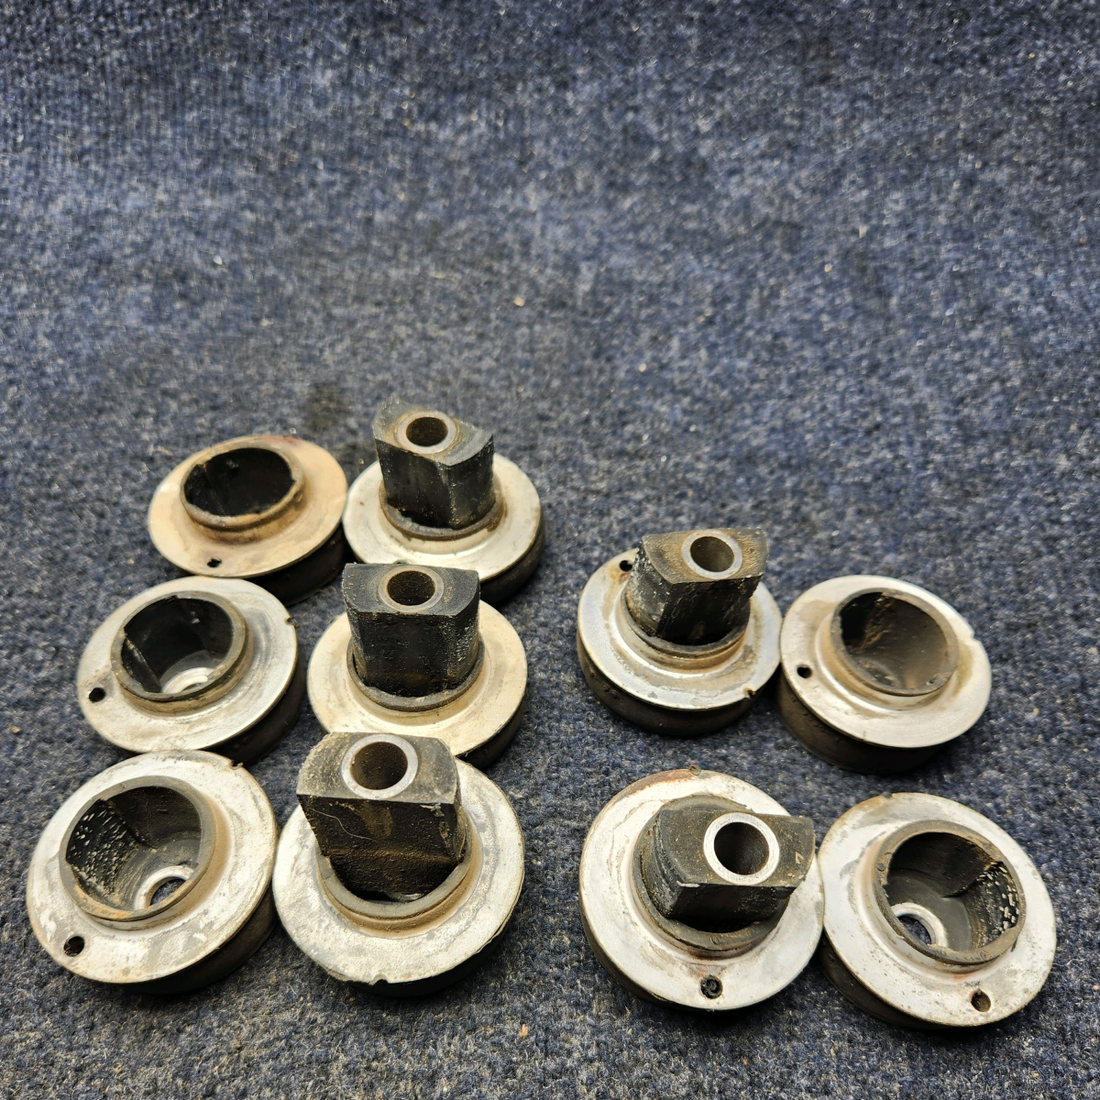 Used aircraft parts for sale, J-7530-1 Continental Texas Several CONTINENTAL LORD ENGINE MOUNT SET FIVE (5)